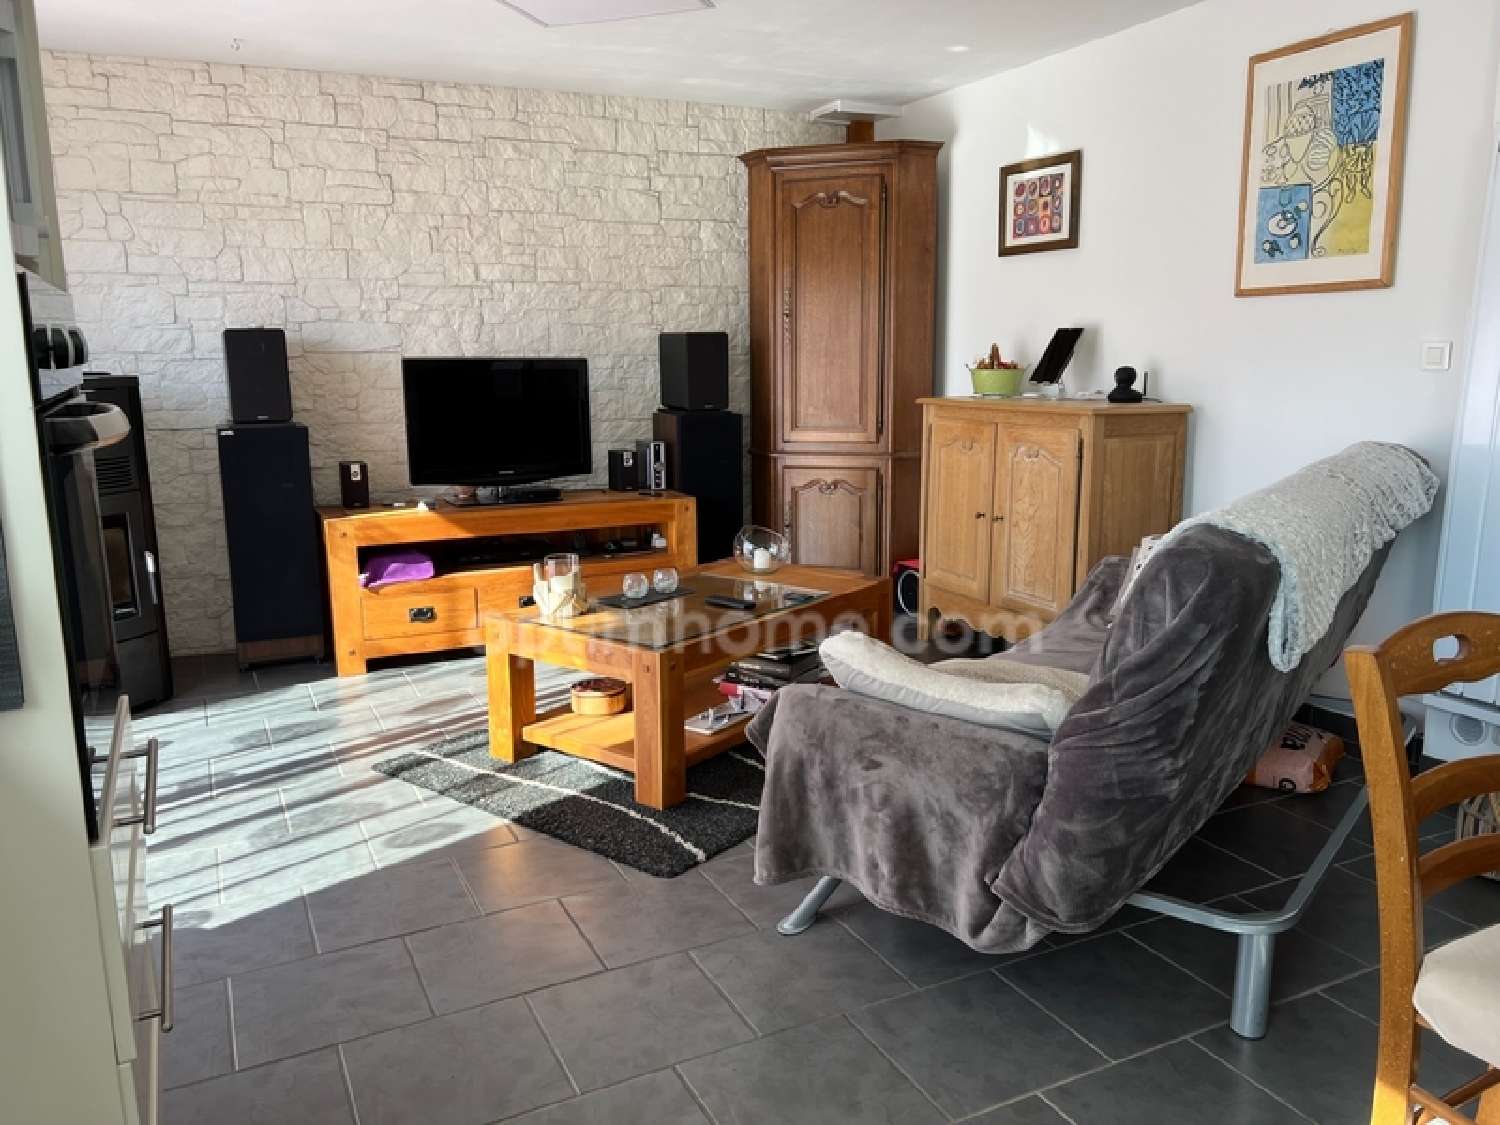  for sale city house Lisieux Calvados 6